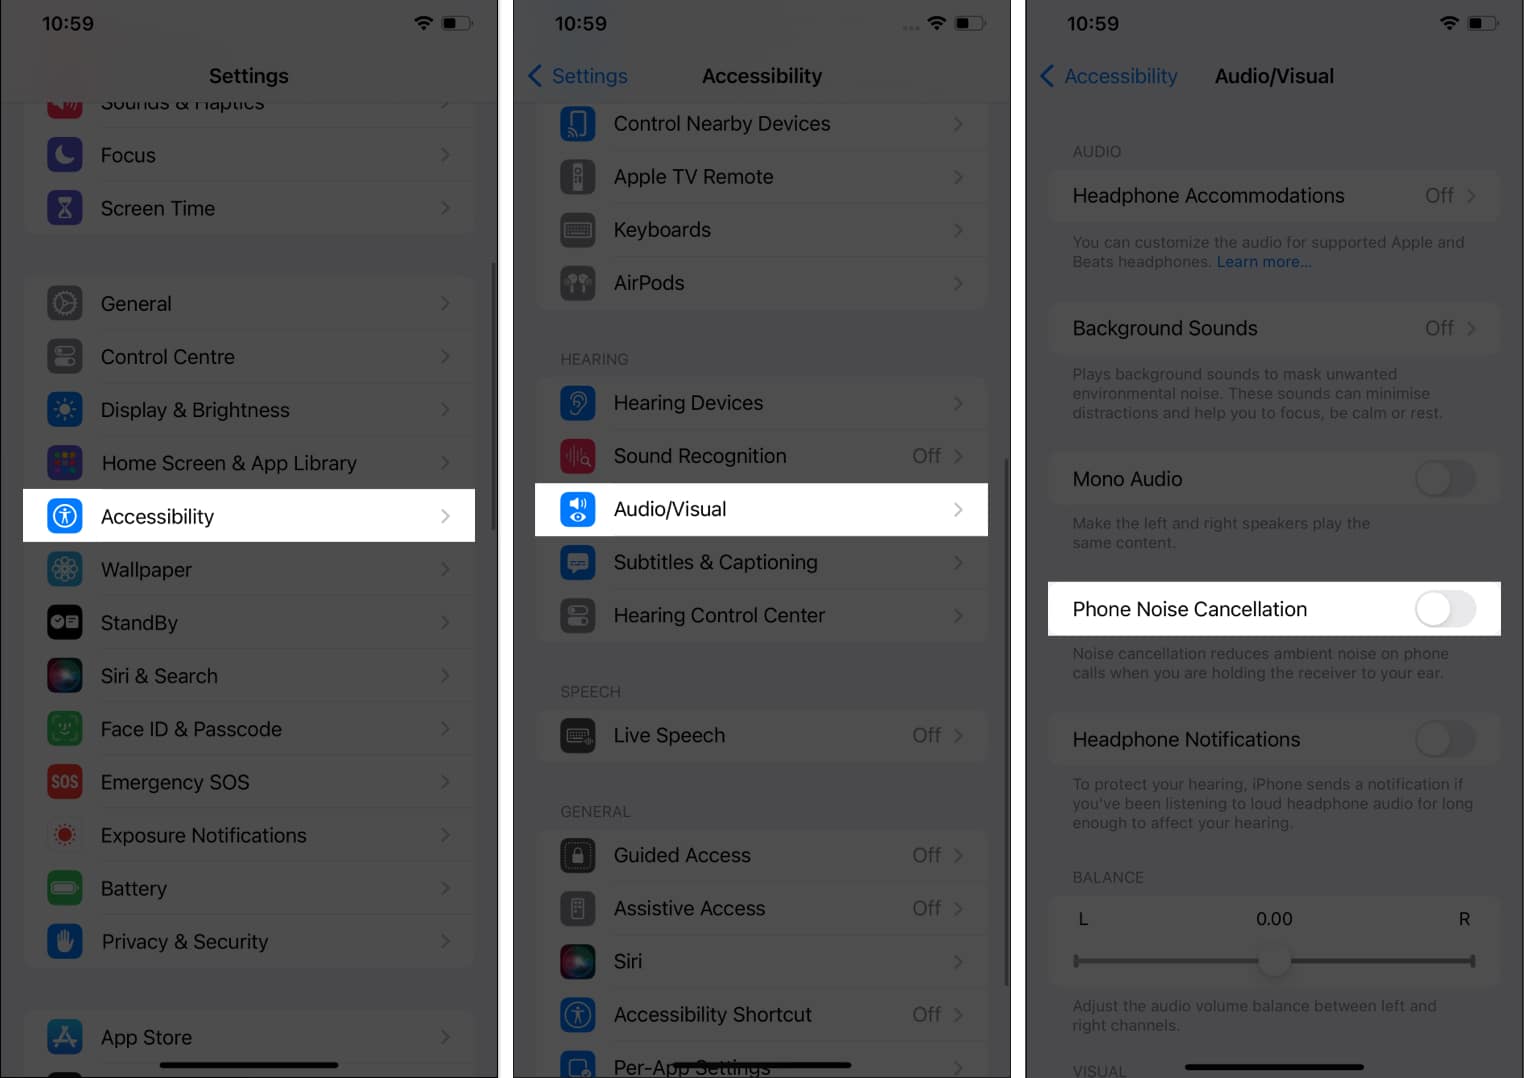 Disable Phone Noise Cancellation from Accessibility Settings